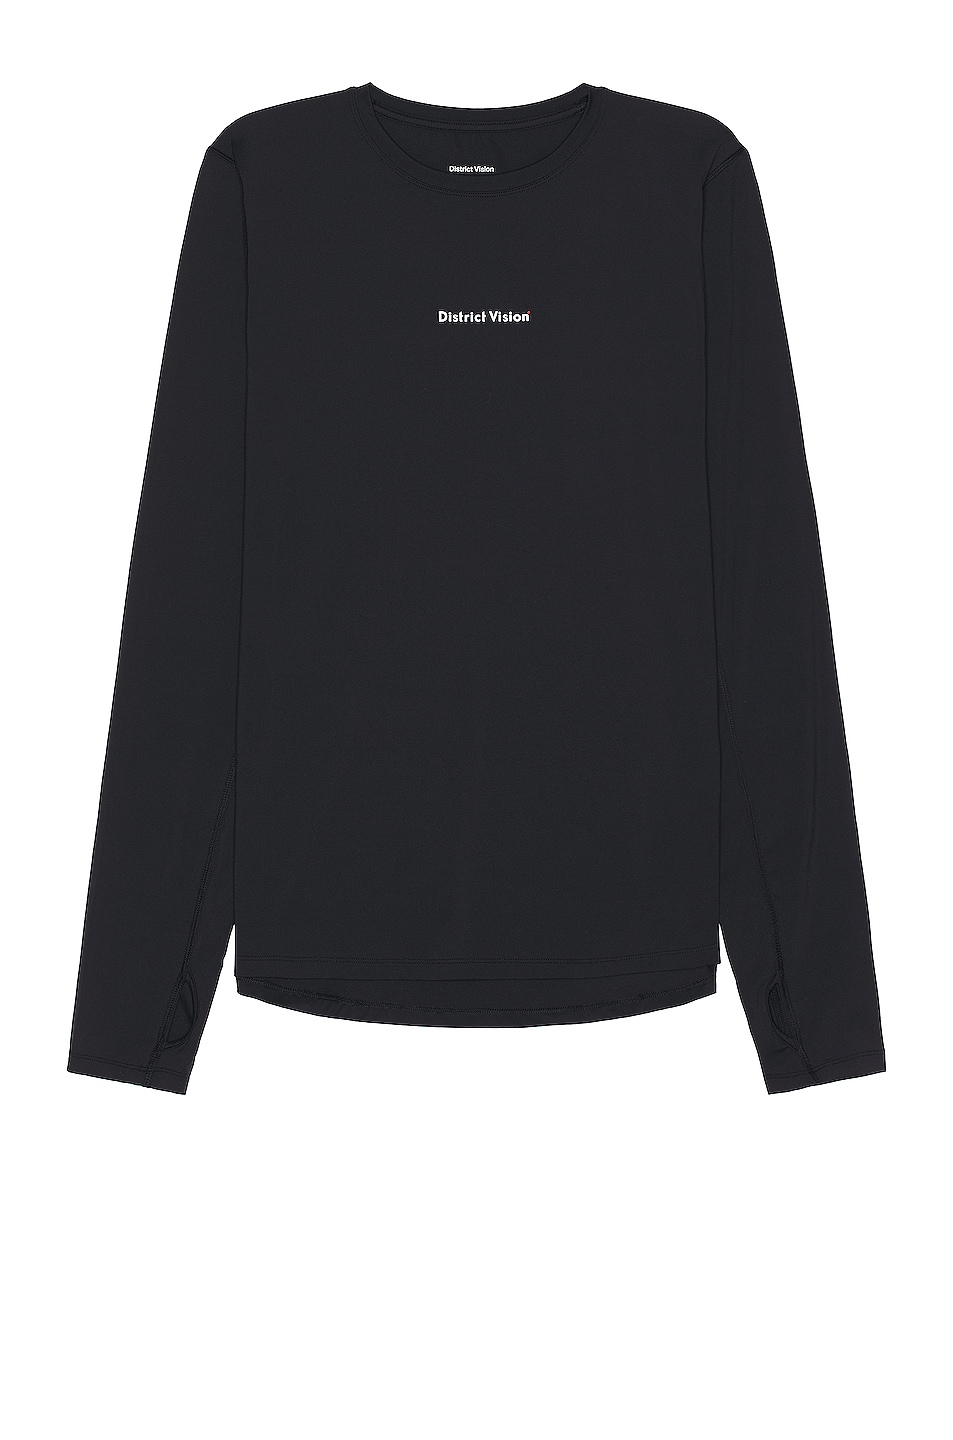 Image 1 of District Vision Aloe Long Sleeve T-shirt in Black